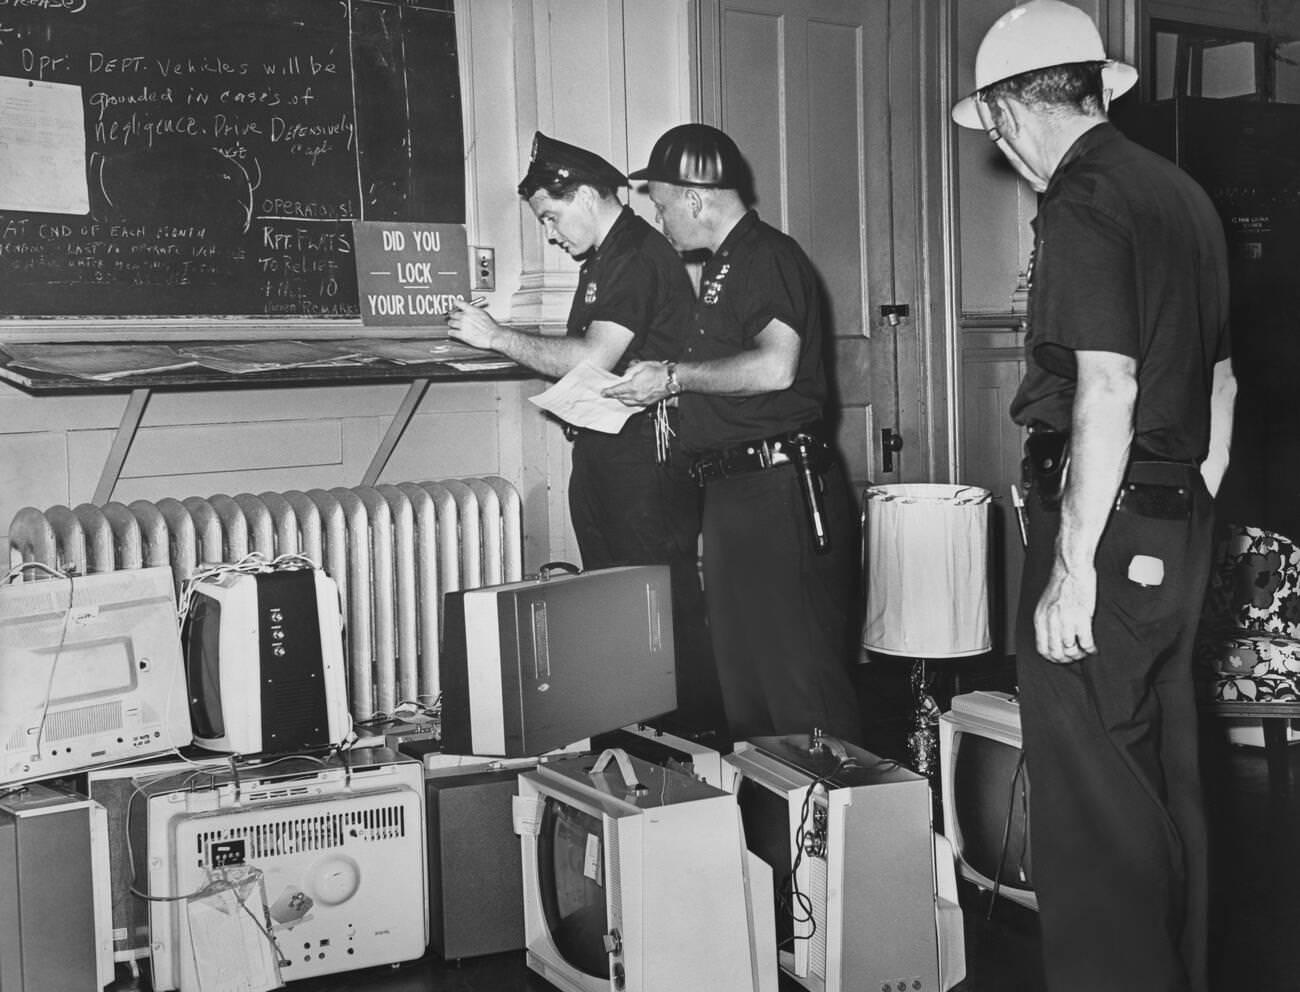 Officers Document Confiscated Items After A Night Of Rioting In Brooklyn, July 22, 1964.